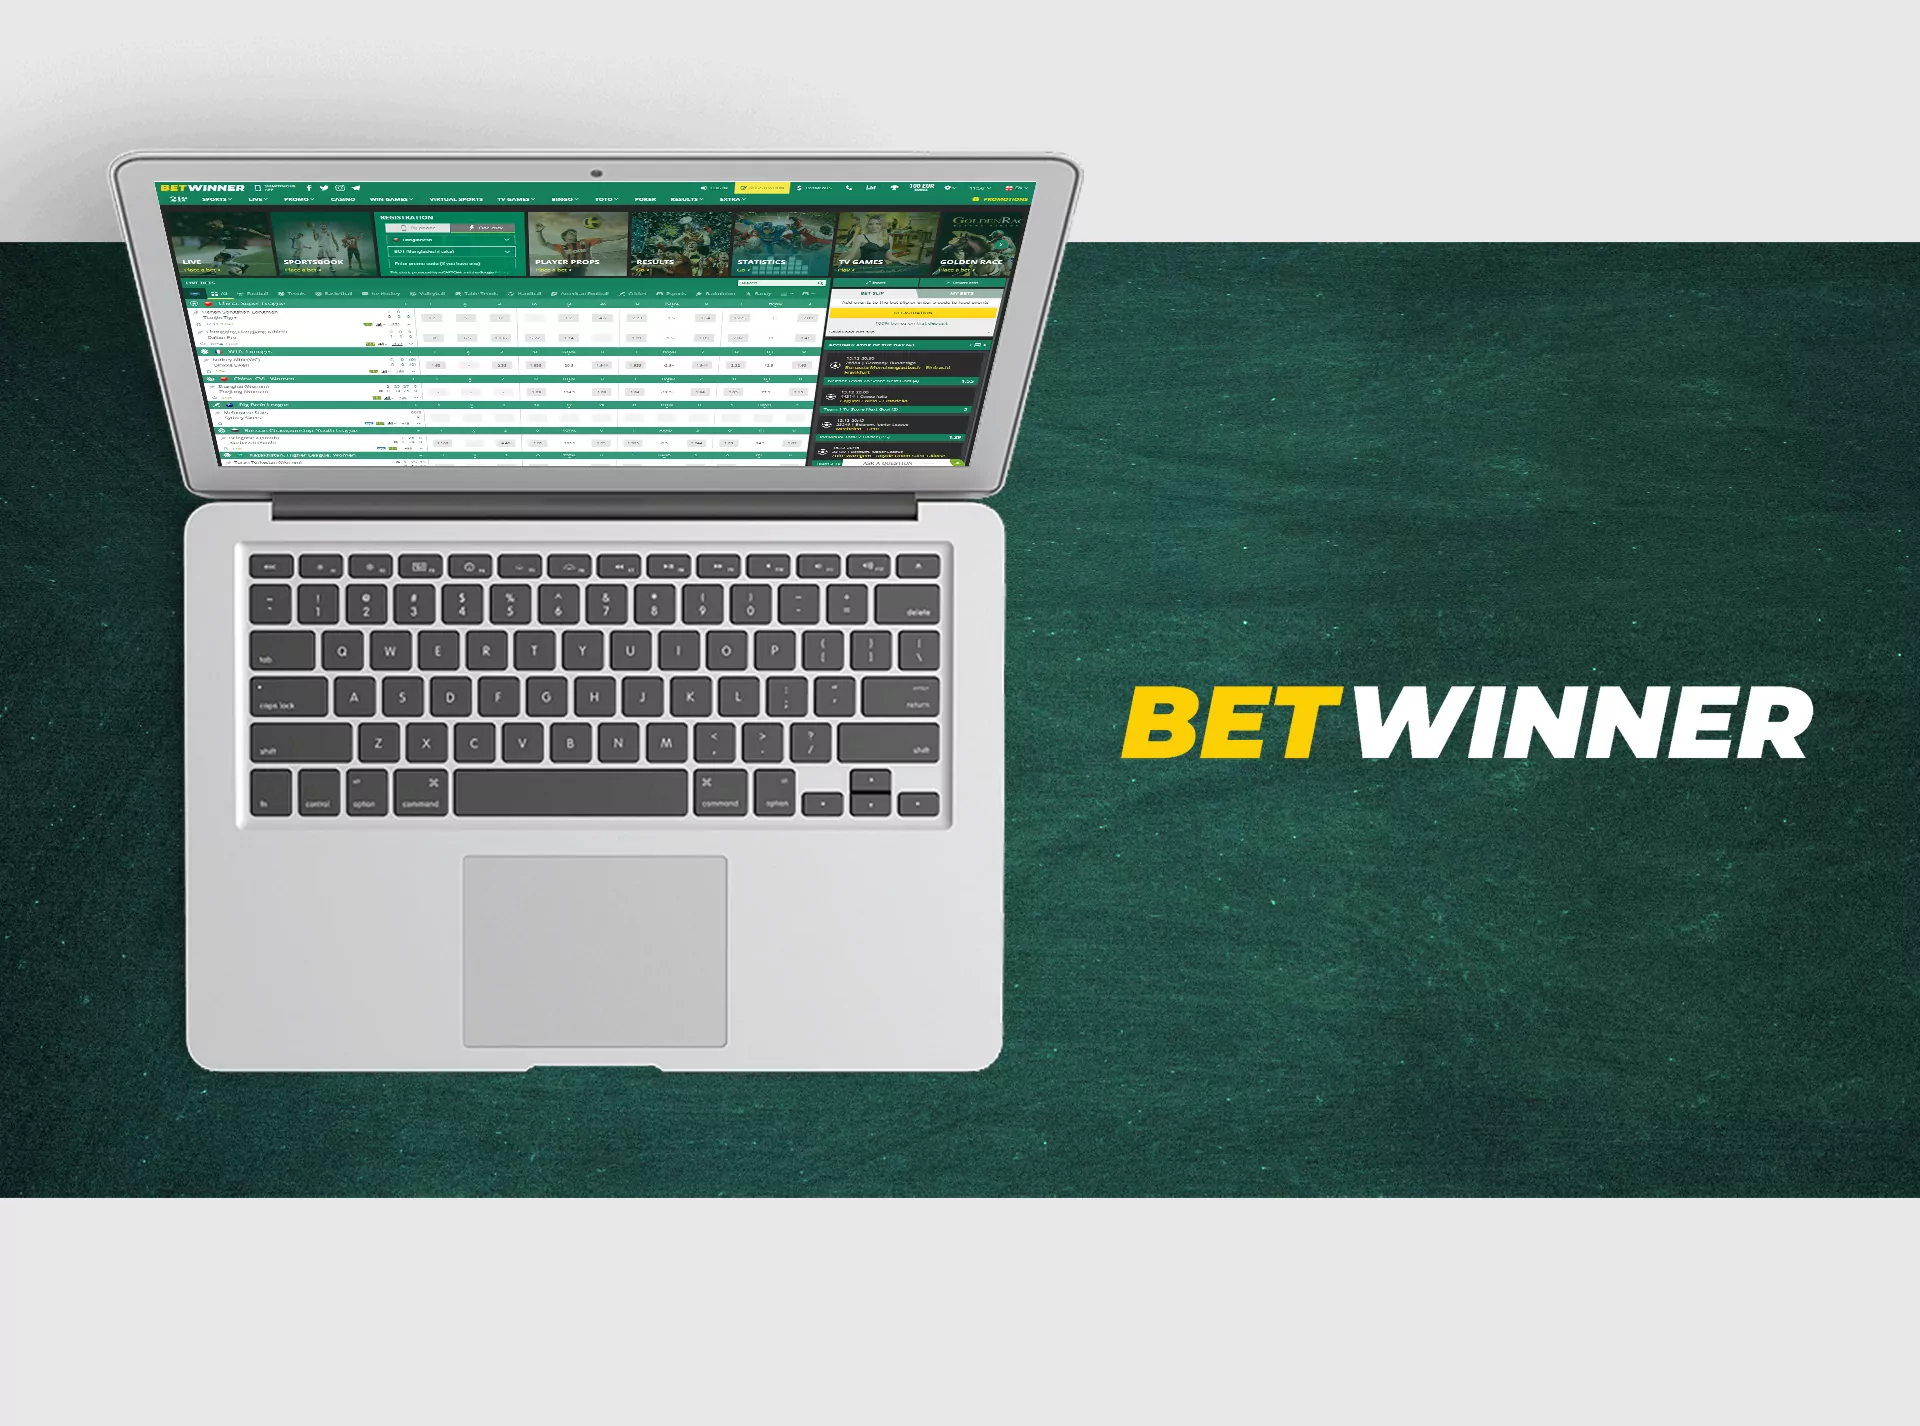 Users of BetWinner have many options for sports betting and plenty of payment methods.